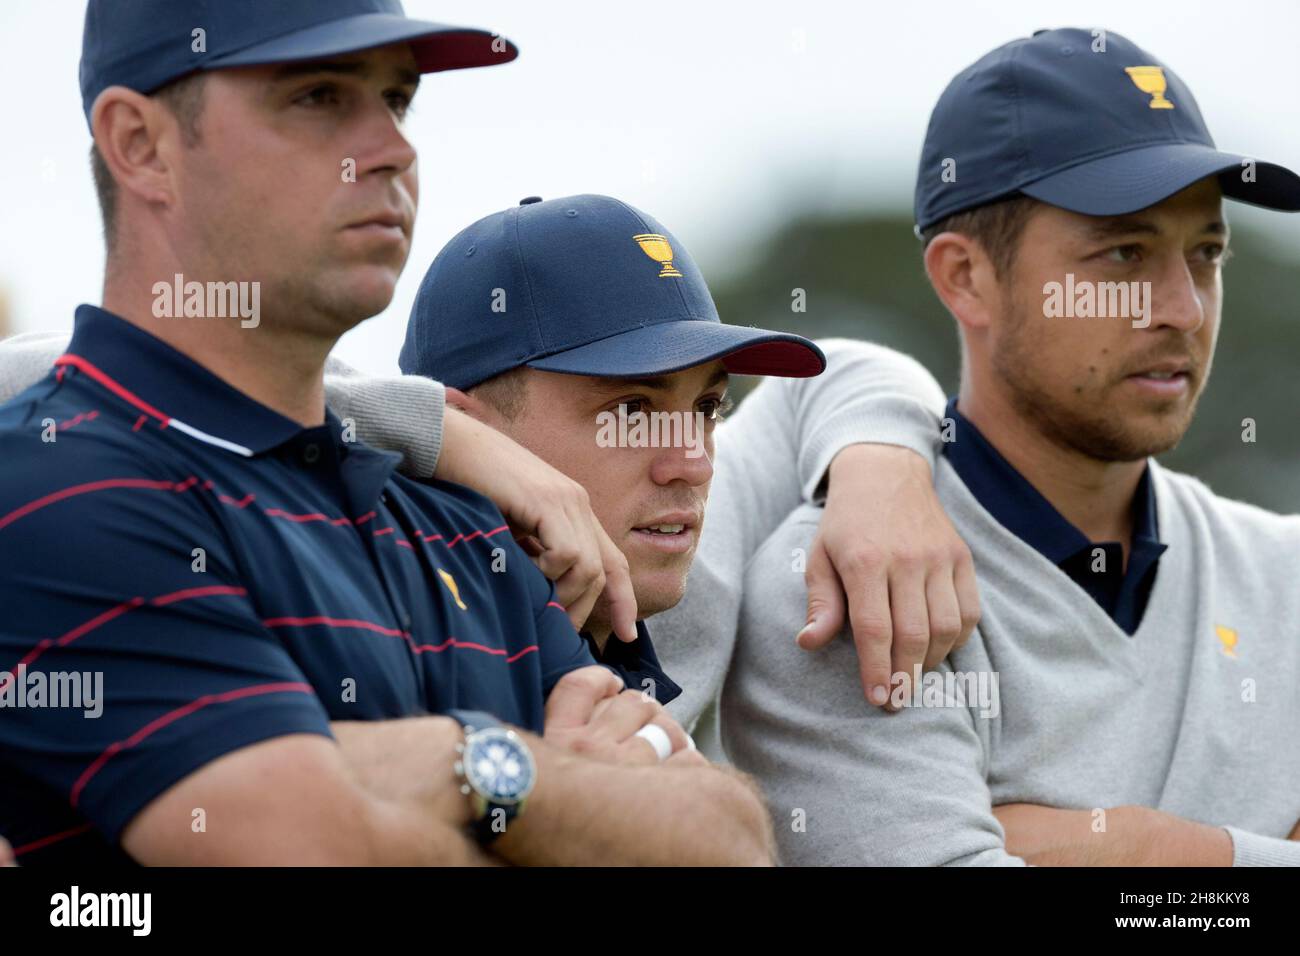 Garry Woodland of team USA, Patrick Cantlay of team USA and Xander Schauffele of team USA during round 3 of The Presidents Cup Credit Speed Media/Alamy Live News Stock Photo